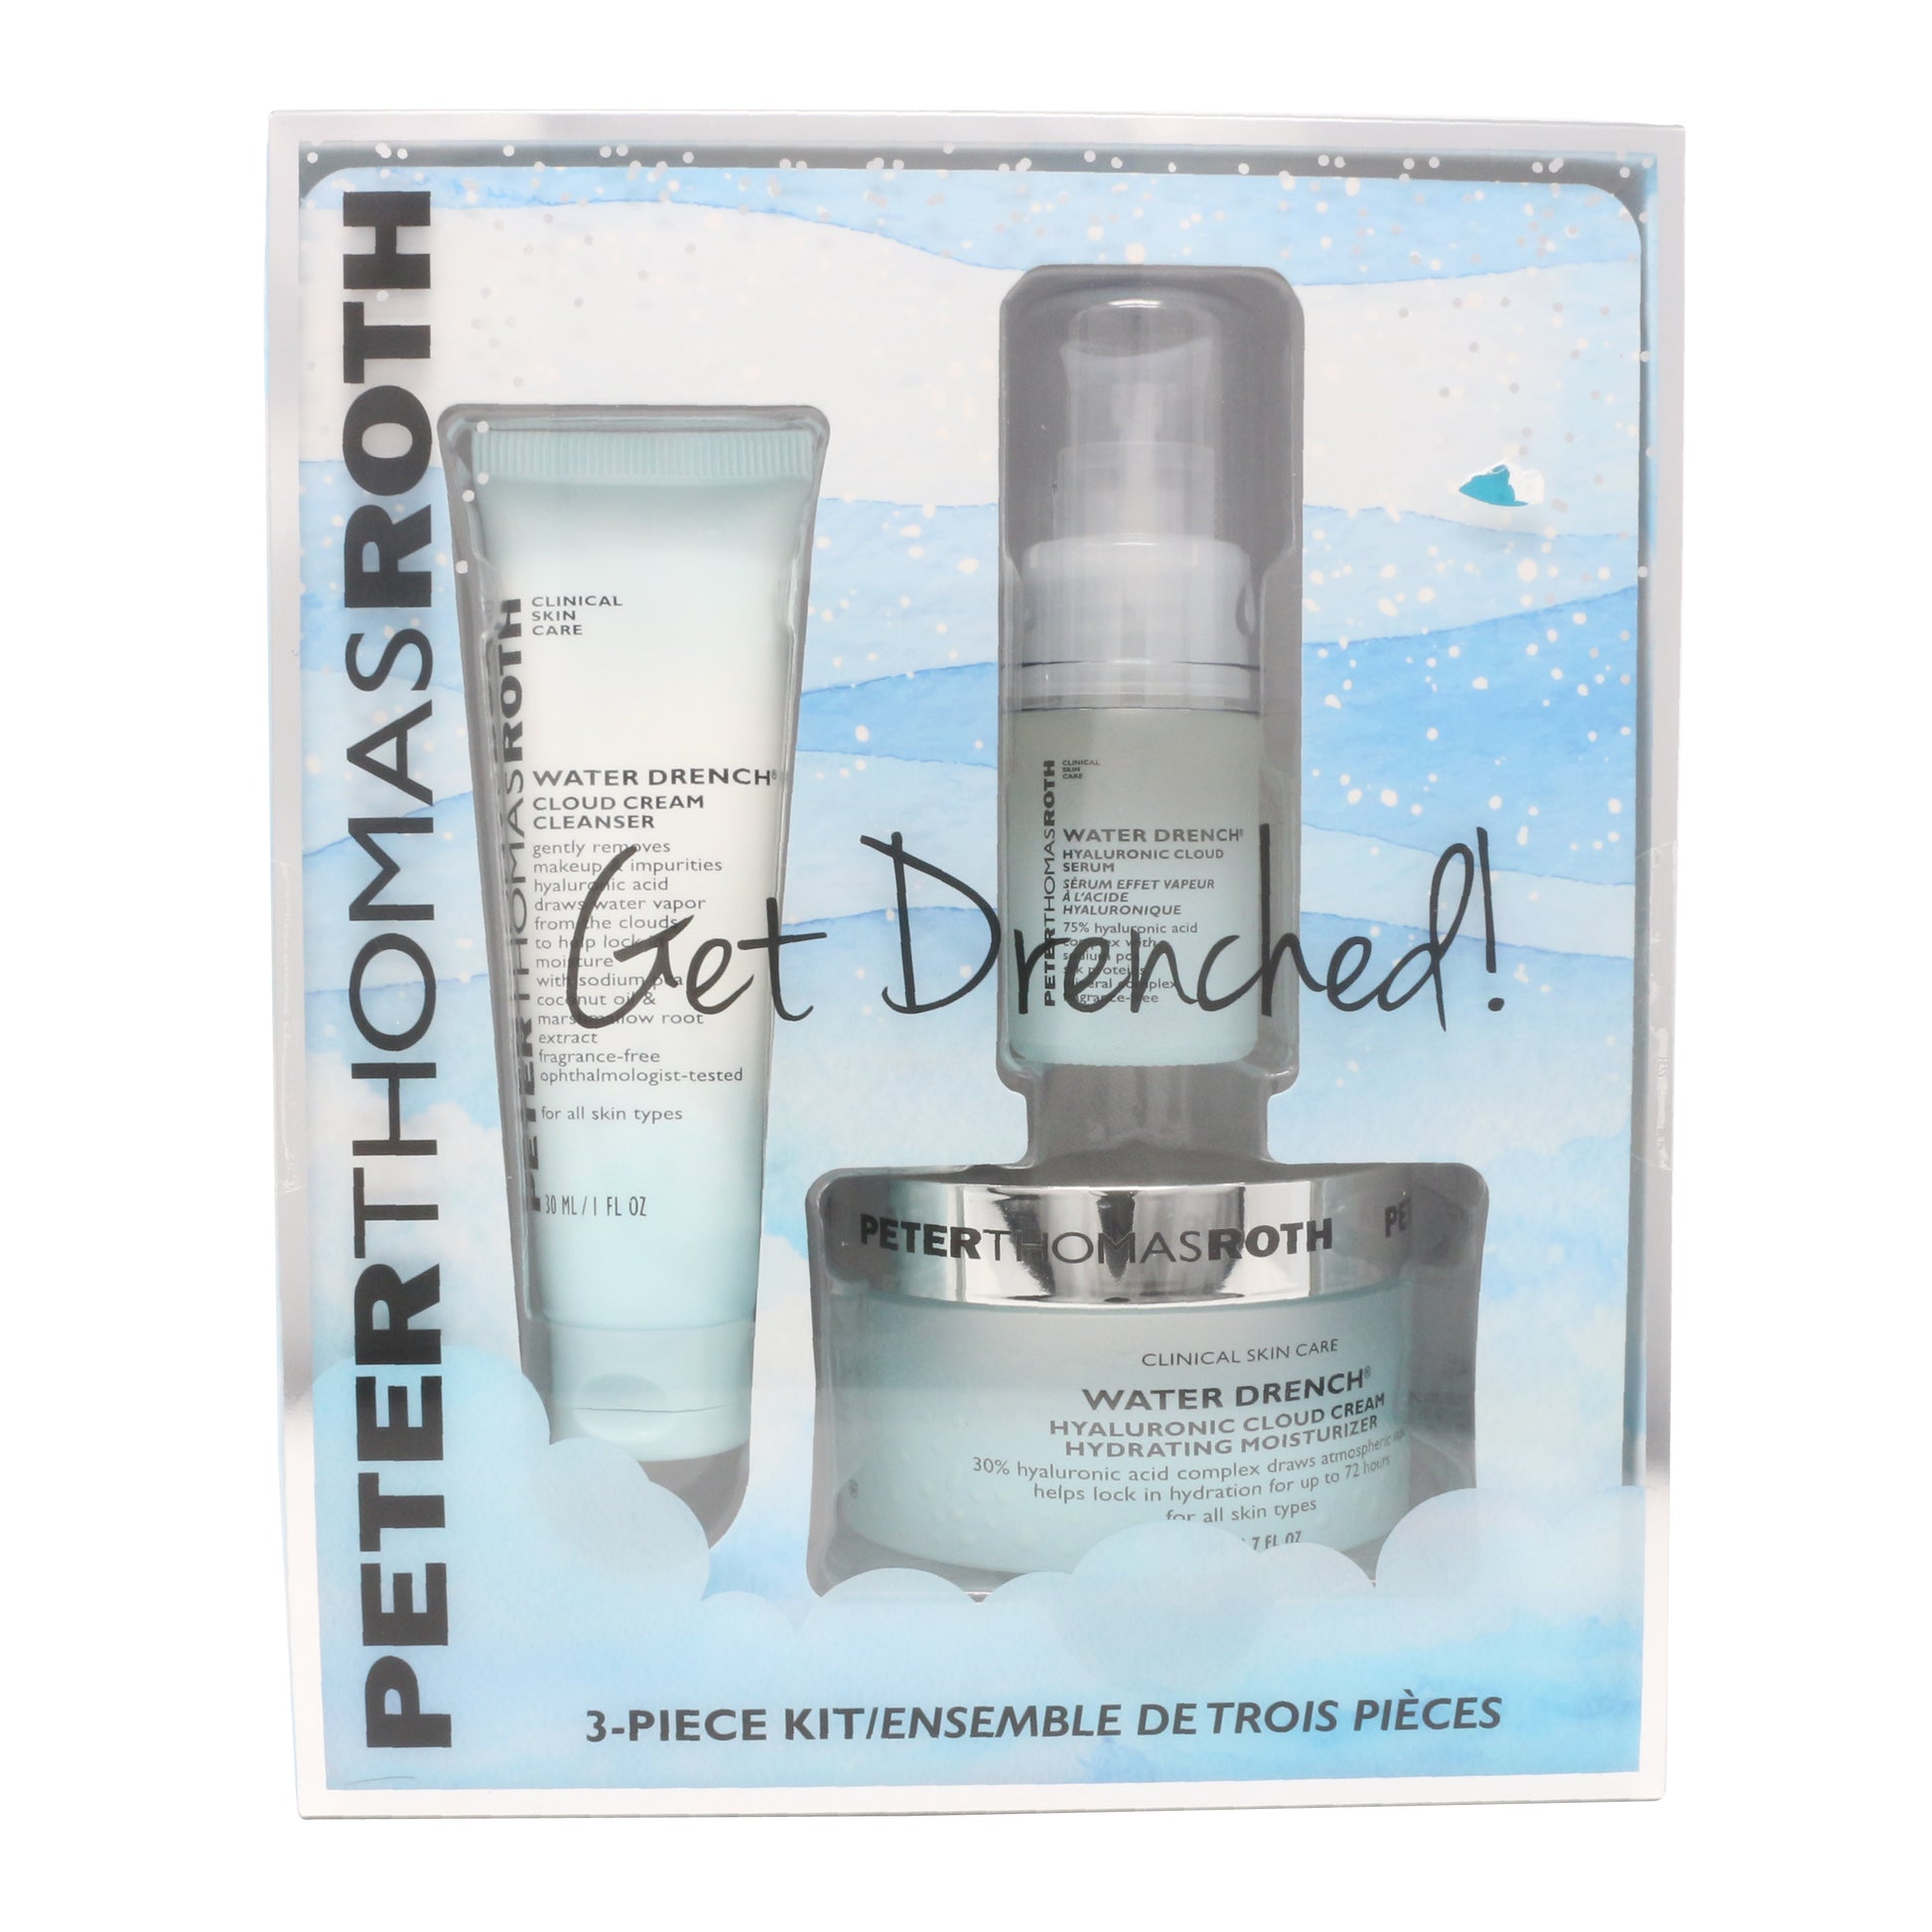 Get Drenched 3-Piece Kit